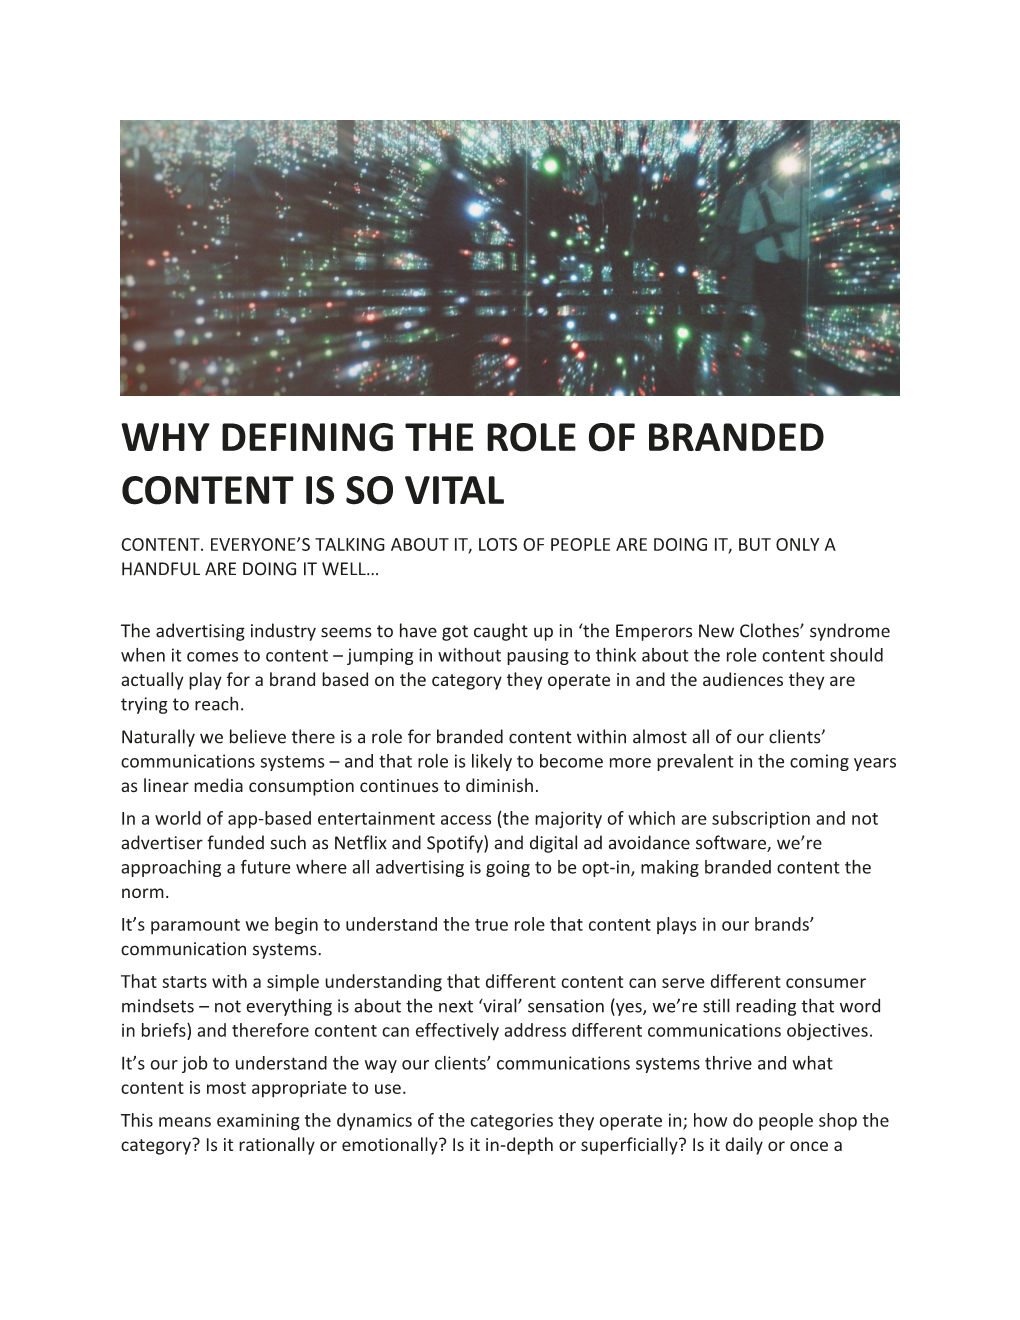 Why Defining the Role of Branded Content Is So Vital